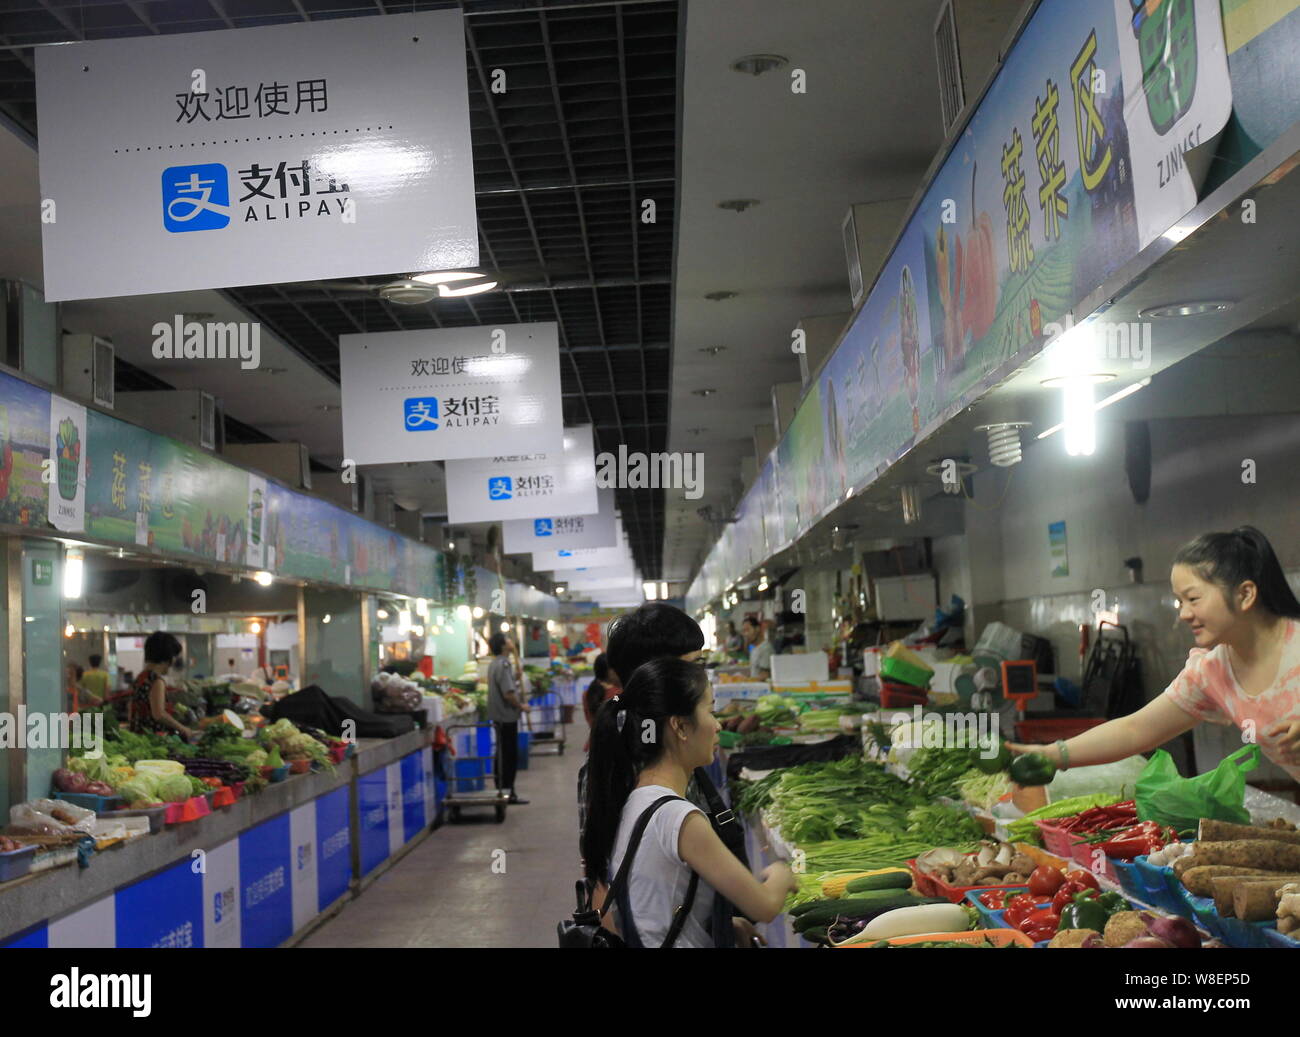 Chinese customers shop for vegetables under advertisements for mobile payment service Alipay of Alibaba Group at a free market in Wenzhou city, east C Stock Photo